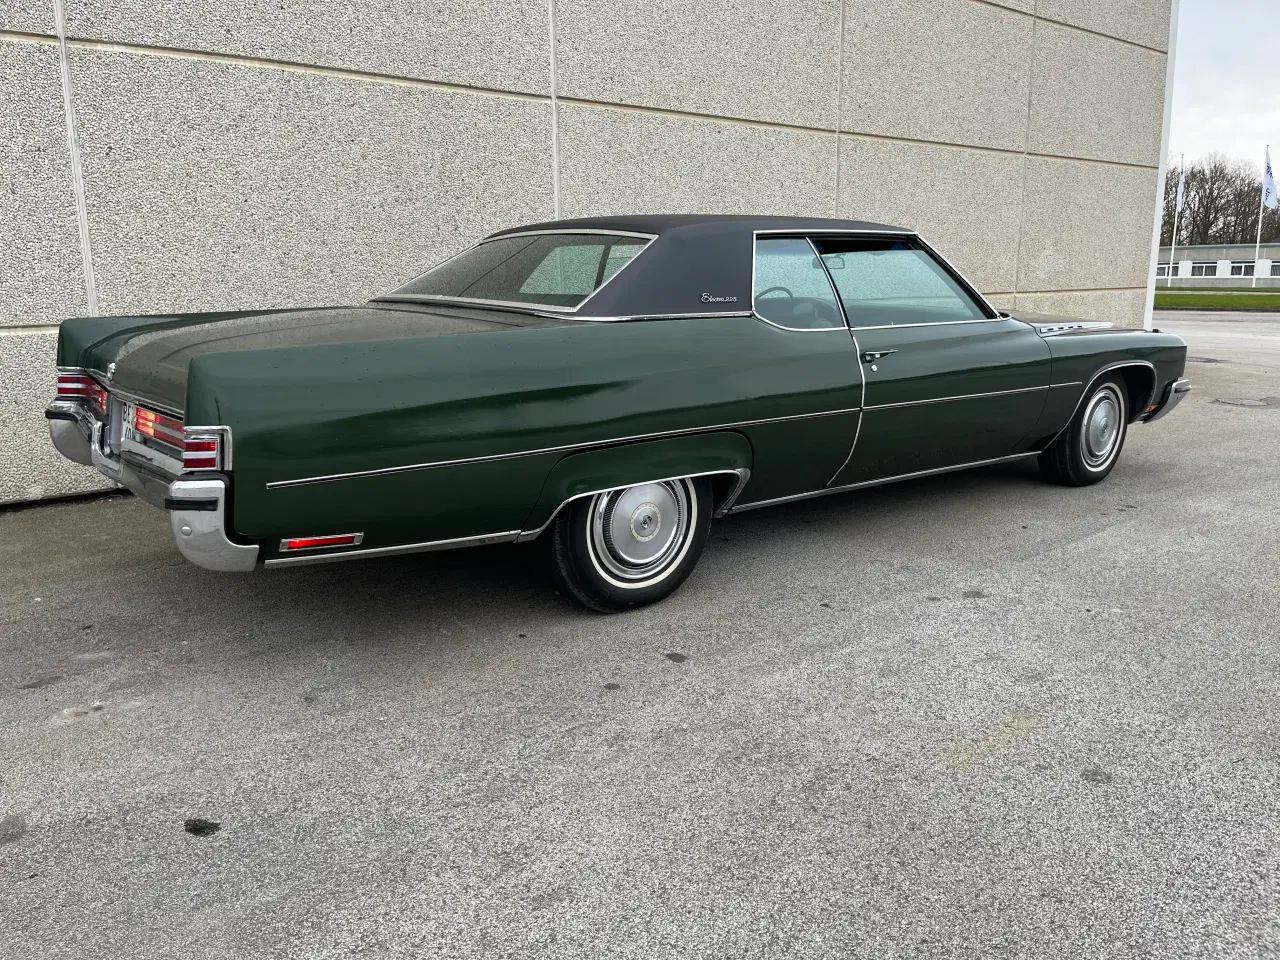 Billede 3 - Buick Electra 225 coupe